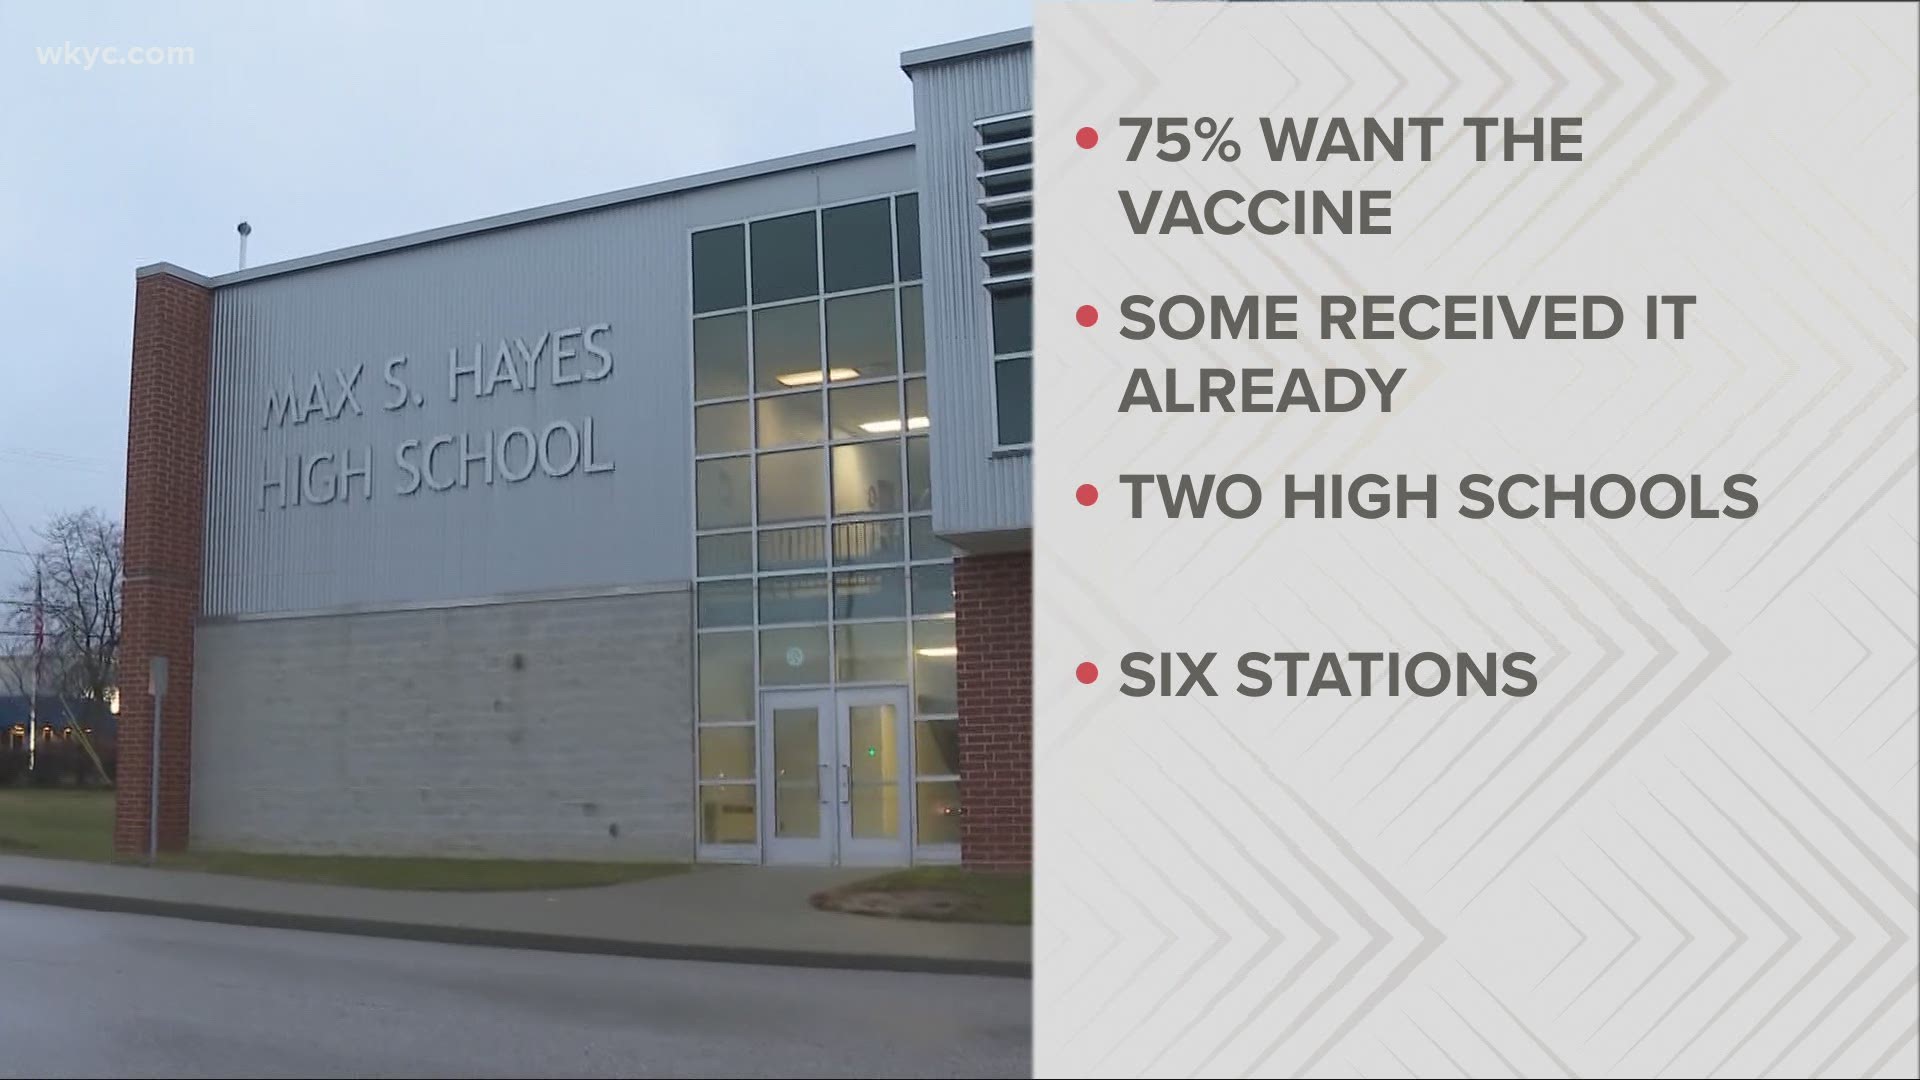 Northeast Ohio's largest public school system is preparing to roll out the Covid-19 vaccine to its faculty, staff, and contractors next week. Romney Smith has more.